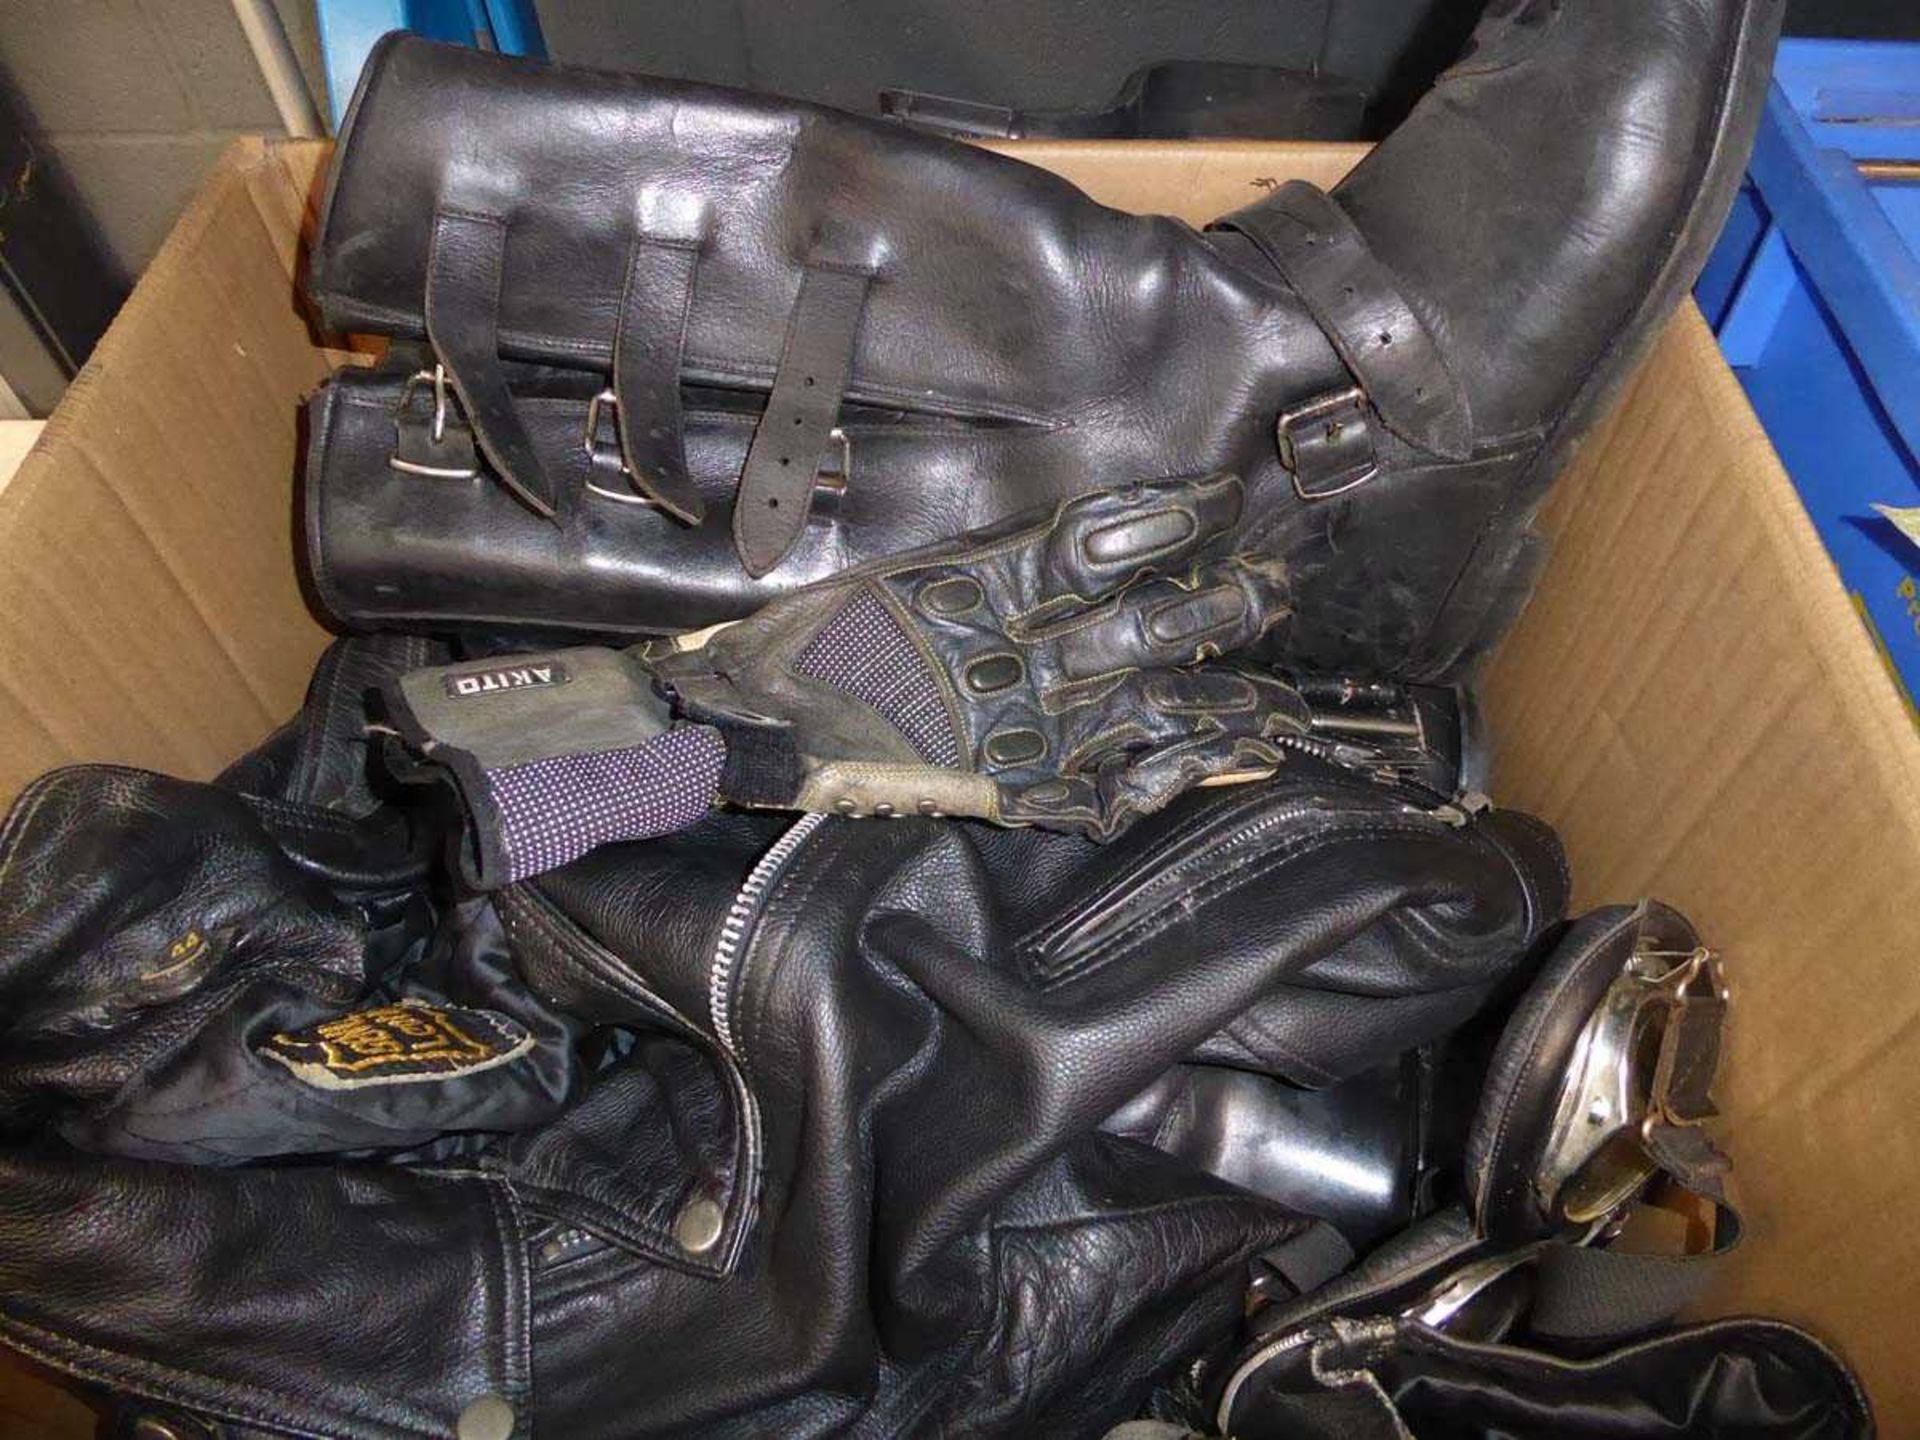 Motorbike gear including boots, goggles, gloves and jacket